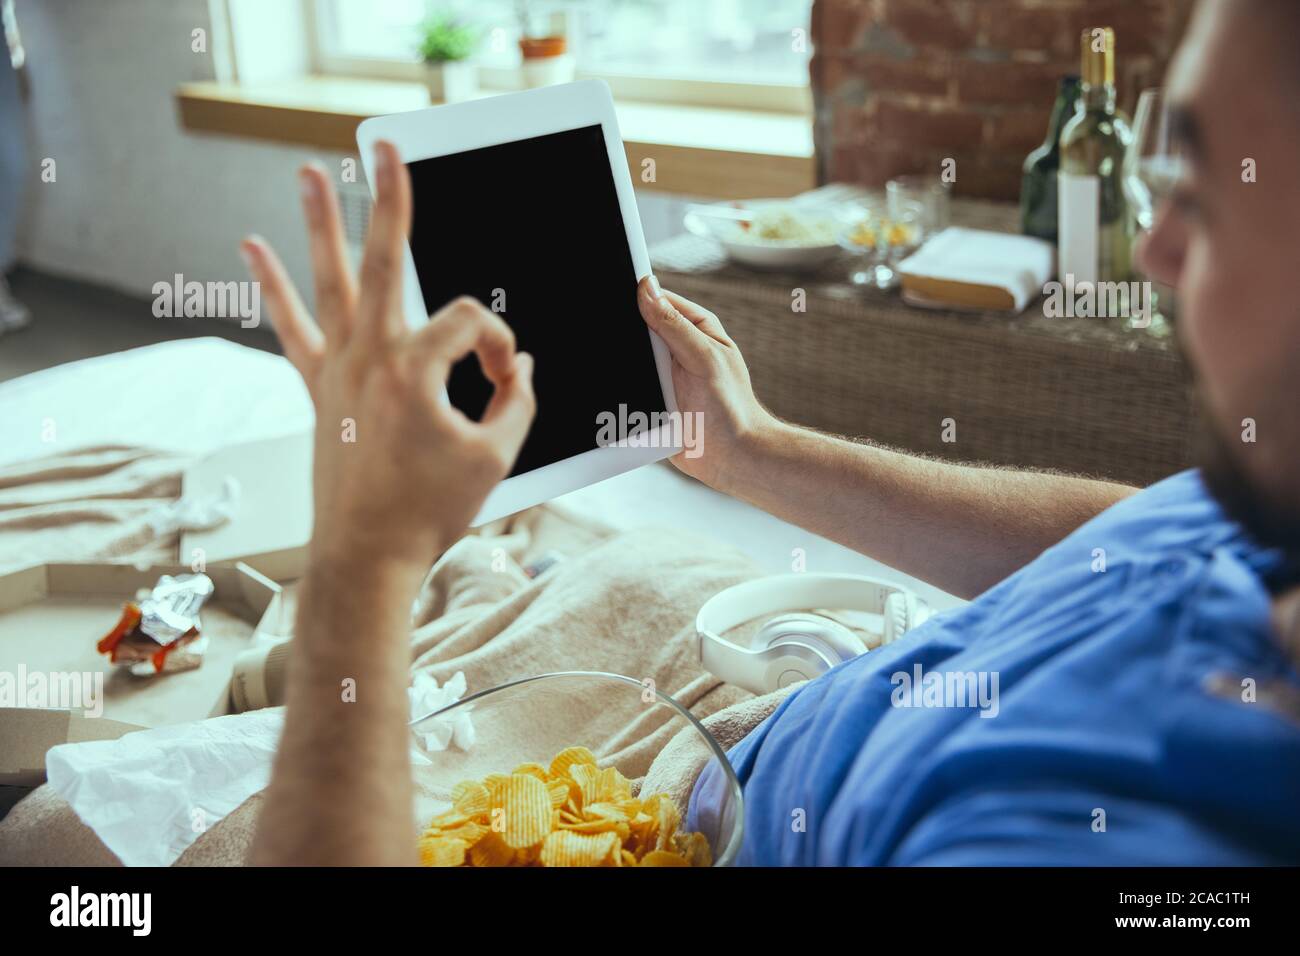 Eating crisps, nice gesture. Lazy man living in his bed surrounded with messy. No need to go out to be happy. Using gadgets, watching movie and series, looks emotional. Tablet with copyspace for ad. Stock Photo